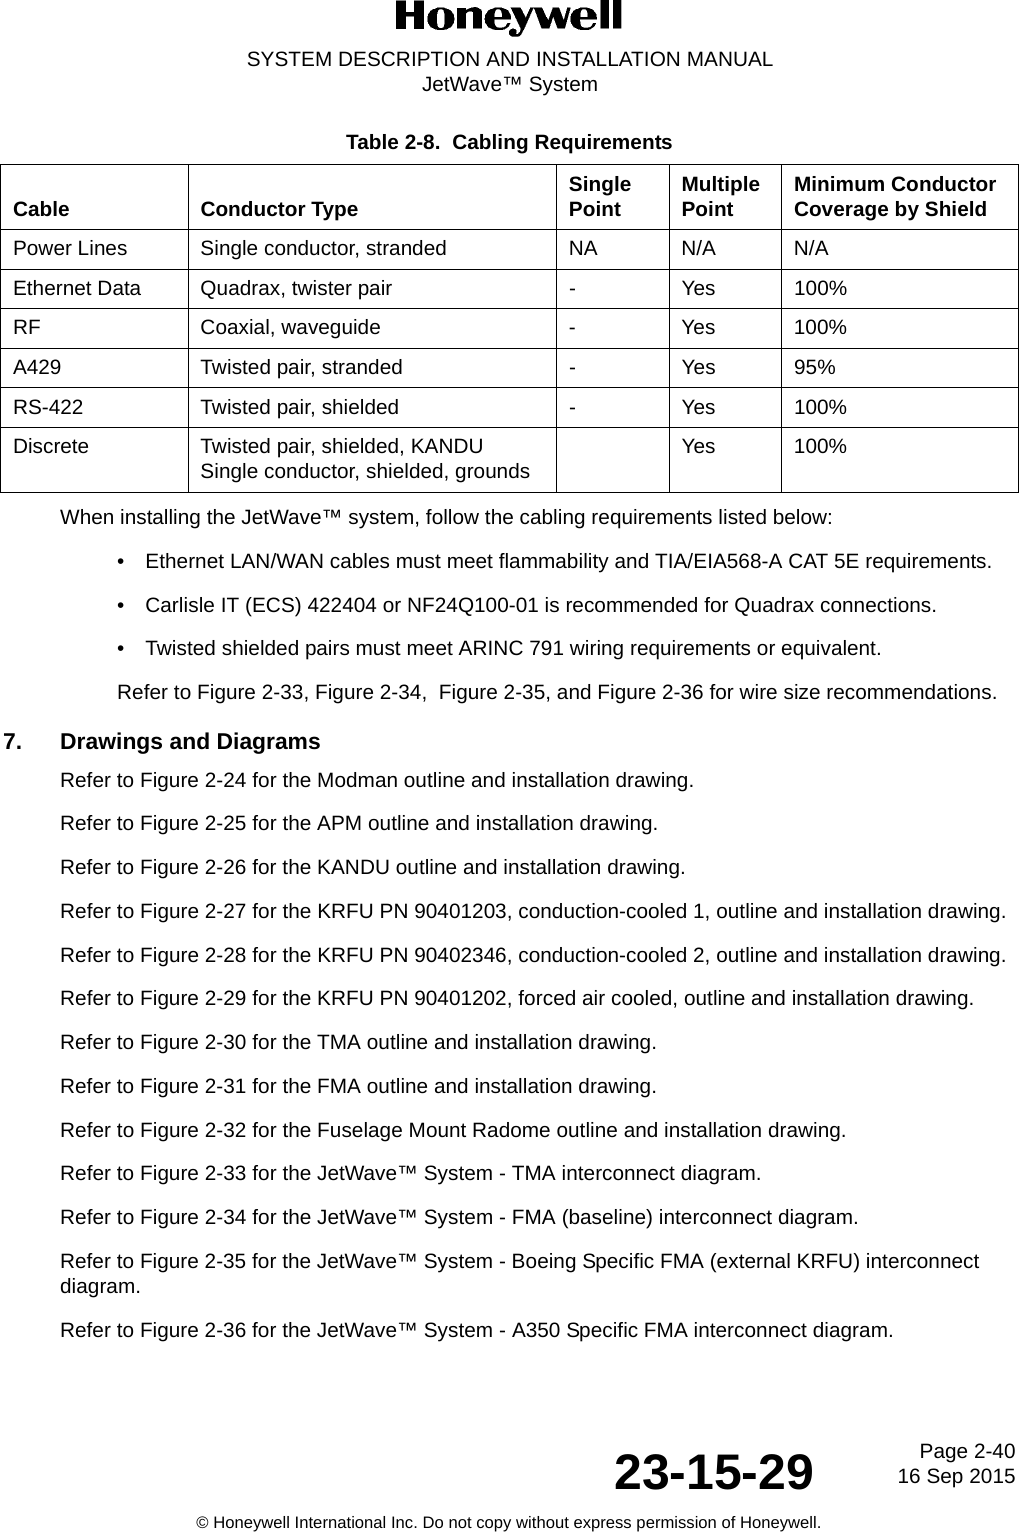 Page 2-40 16 Sep 201523-15-29SYSTEM DESCRIPTION AND INSTALLATION MANUALJetWave™ System© Honeywell International Inc. Do not copy without express permission of Honeywell.When installing the JetWave™ system, follow the cabling requirements listed below:• Ethernet LAN/WAN cables must meet flammability and TIA/EIA568-A CAT 5E requirements.• Carlisle IT (ECS) 422404 or NF24Q100-01 is recommended for Quadrax connections.• Twisted shielded pairs must meet ARINC 791 wiring requirements or equivalent.Refer to Figure 2-33, Figure 2-34,  Figure 2-35, and Figure 2-36 for wire size recommendations.7. Drawings and DiagramsRefer to Figure 2-24 for the Modman outline and installation drawing.Refer to Figure 2-25 for the APM outline and installation drawing. Refer to Figure 2-26 for the KANDU outline and installation drawing. Refer to Figure 2-27 for the KRFU PN 90401203, conduction-cooled 1, outline and installation drawing. Refer to Figure 2-28 for the KRFU PN 90402346, conduction-cooled 2, outline and installation drawing. Refer to Figure 2-29 for the KRFU PN 90401202, forced air cooled, outline and installation drawing. Refer to Figure 2-30 for the TMA outline and installation drawing. Refer to Figure 2-31 for the FMA outline and installation drawing. Refer to Figure 2-32 for the Fuselage Mount Radome outline and installation drawing.Refer to Figure 2-33 for the JetWave™ System - TMA interconnect diagram.Refer to Figure 2-34 for the JetWave™ System - FMA (baseline) interconnect diagram.Refer to Figure 2-35 for the JetWave™ System - Boeing Specific FMA (external KRFU) interconnect diagram.Refer to Figure 2-36 for the JetWave™ System - A350 Specific FMA interconnect diagram.Table 2-8.  Cabling RequirementsCable Conductor Type Single Point Multiple Point Minimum ConductorCoverage by ShieldPower Lines Single conductor, stranded  NA N/A N/AEthernet Data Quadrax, twister pair - Yes 100%RF Coaxial, waveguide - Yes 100%A429 Twisted pair, stranded - Yes 95%RS-422 Twisted pair, shielded - Yes 100%Discrete Twisted pair, shielded, KANDUSingle conductor, shielded, grounds Yes 100%